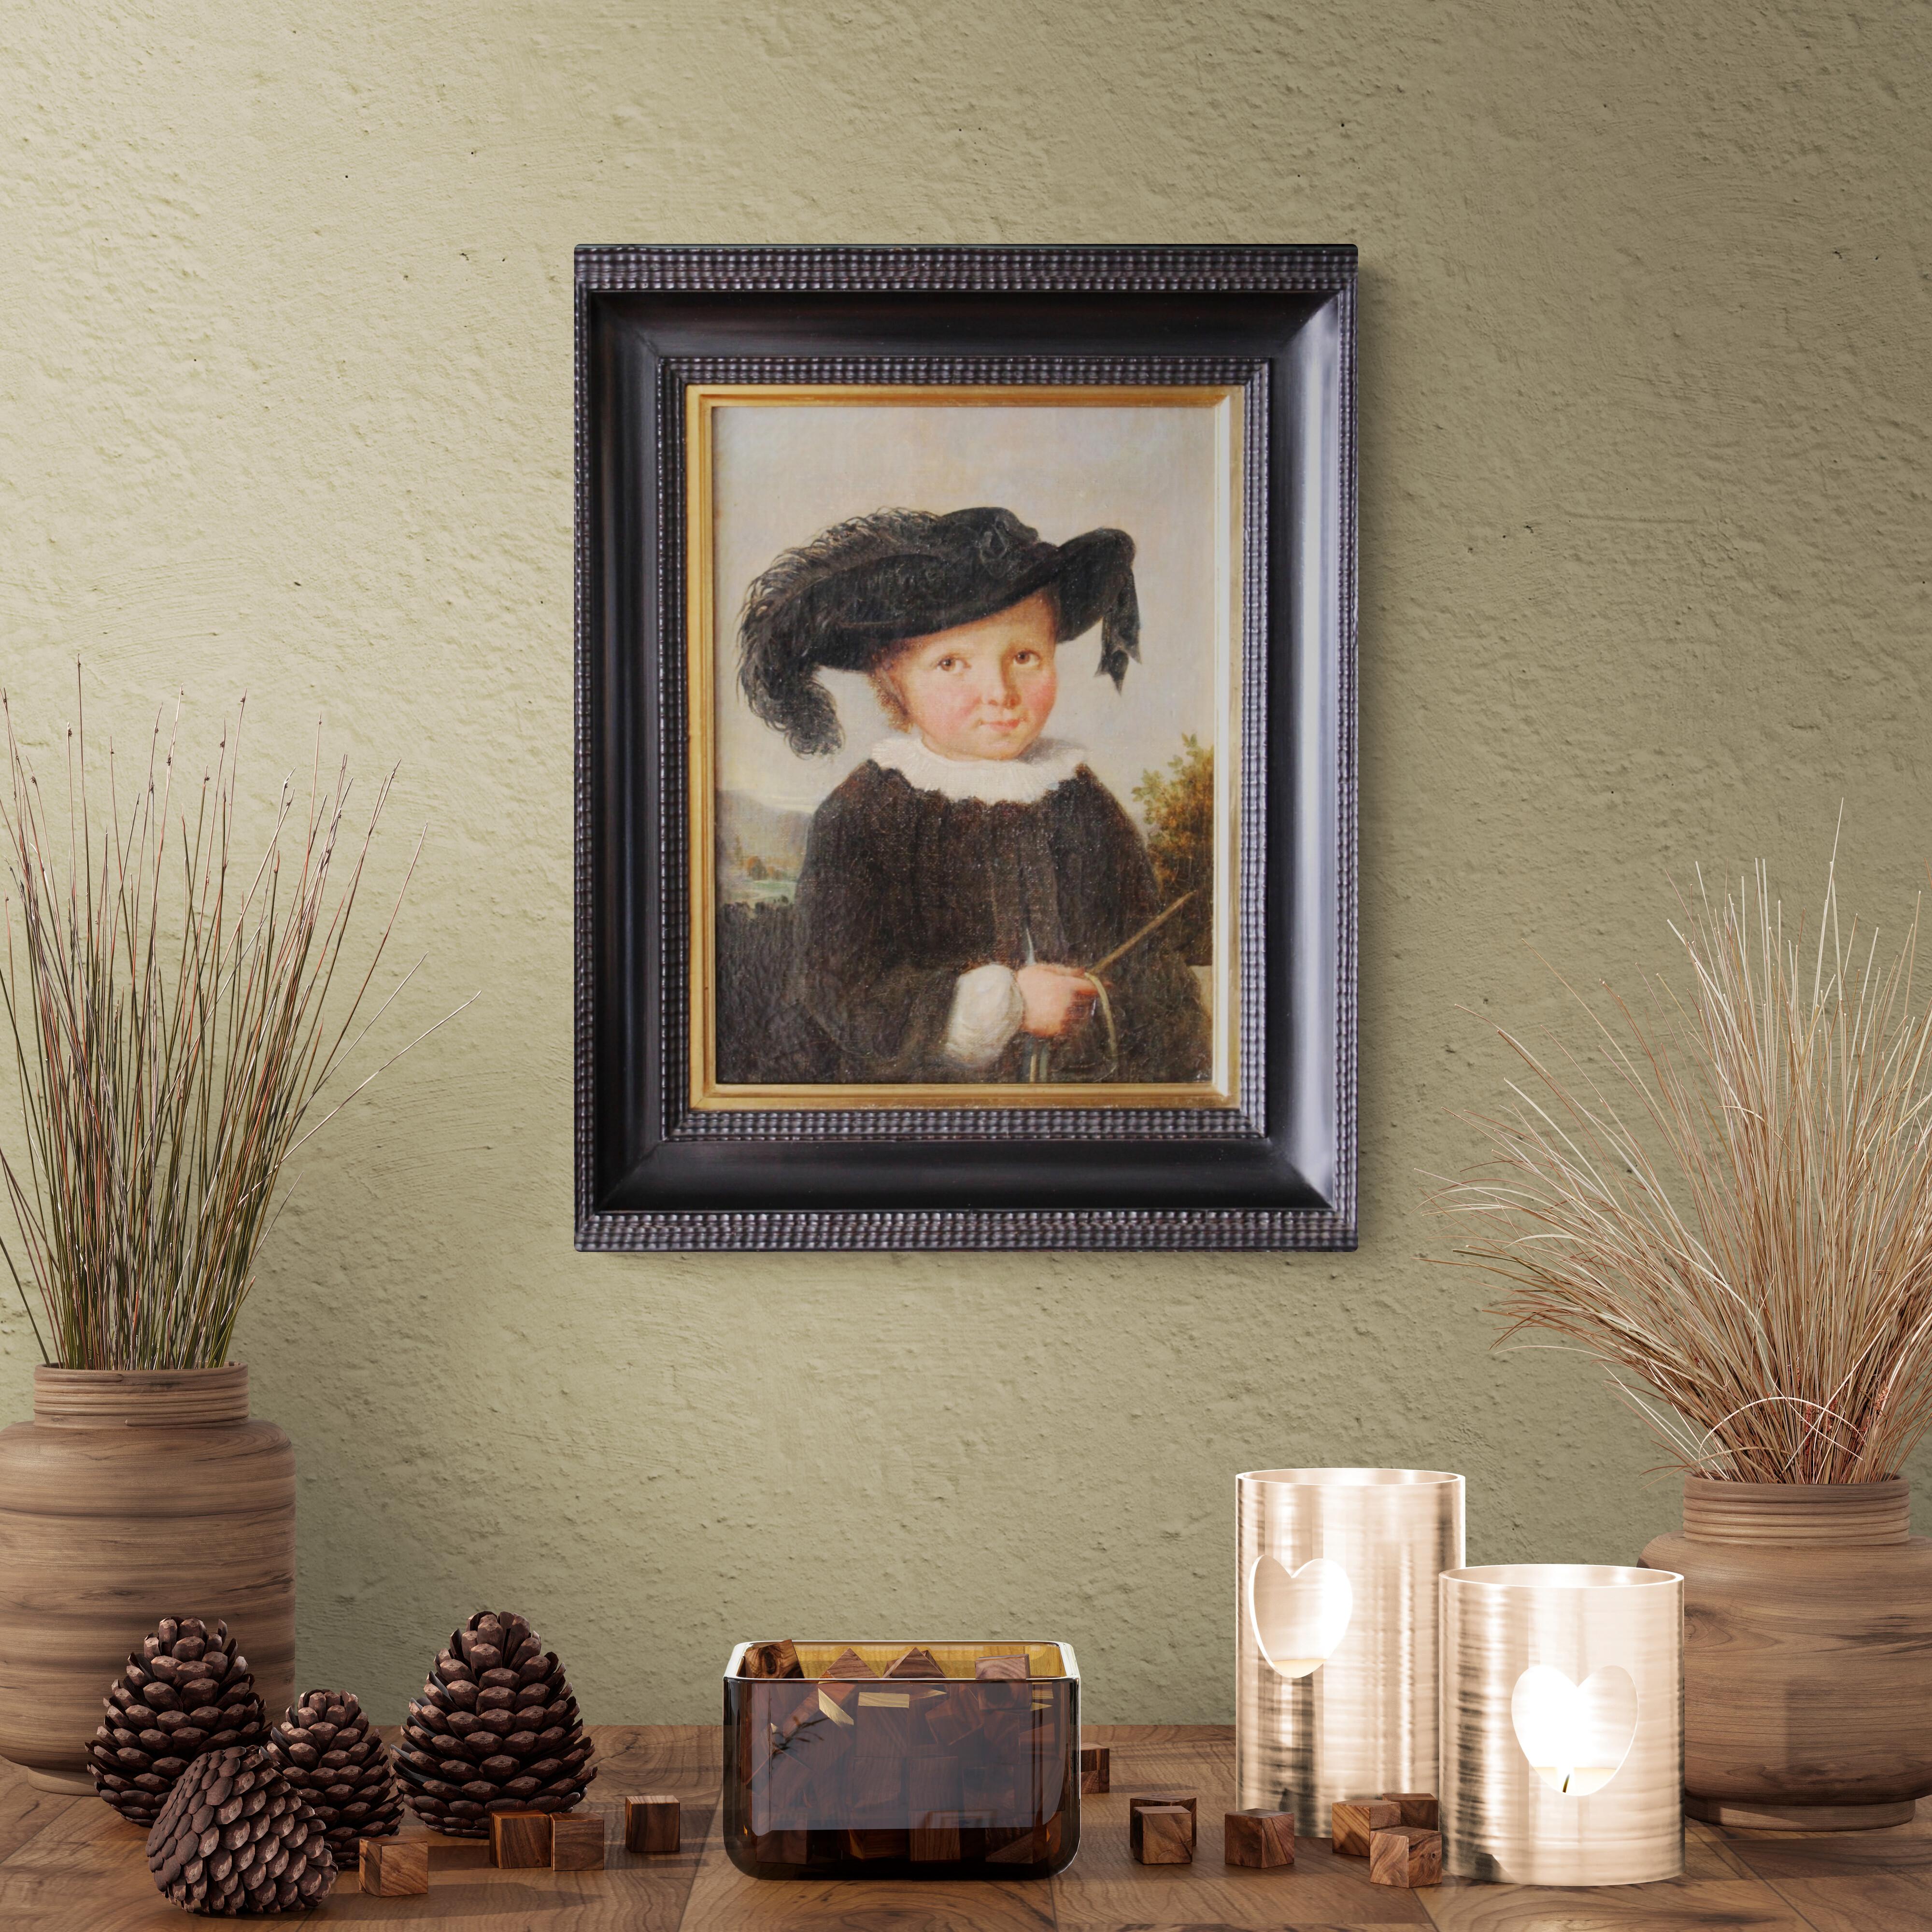 Antique portrait of a boy, child portrait, early 1800's male framed portrait - Painting by Unknown